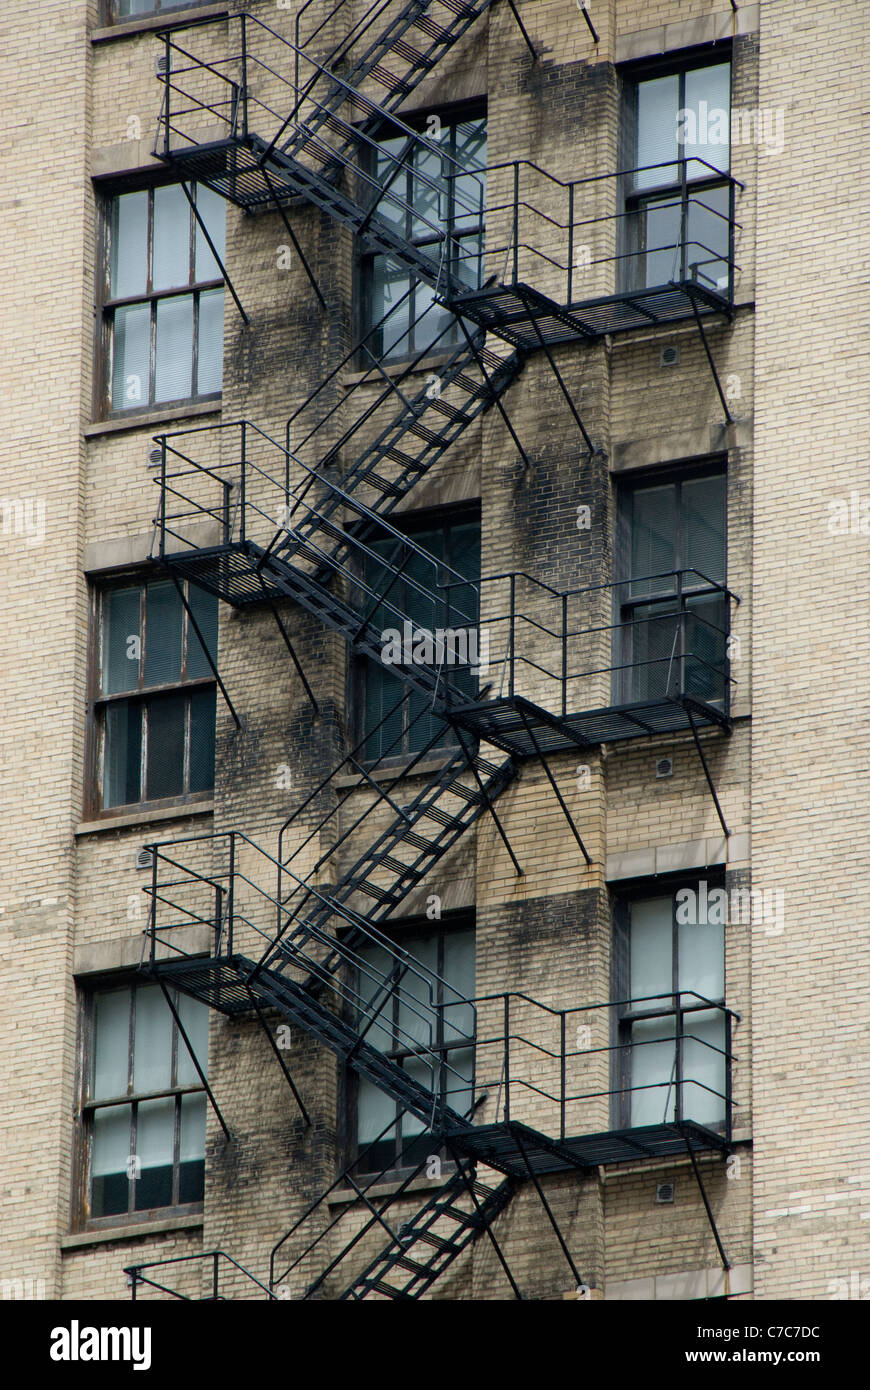 Fire escape walkup new york building. A tall building with a fire